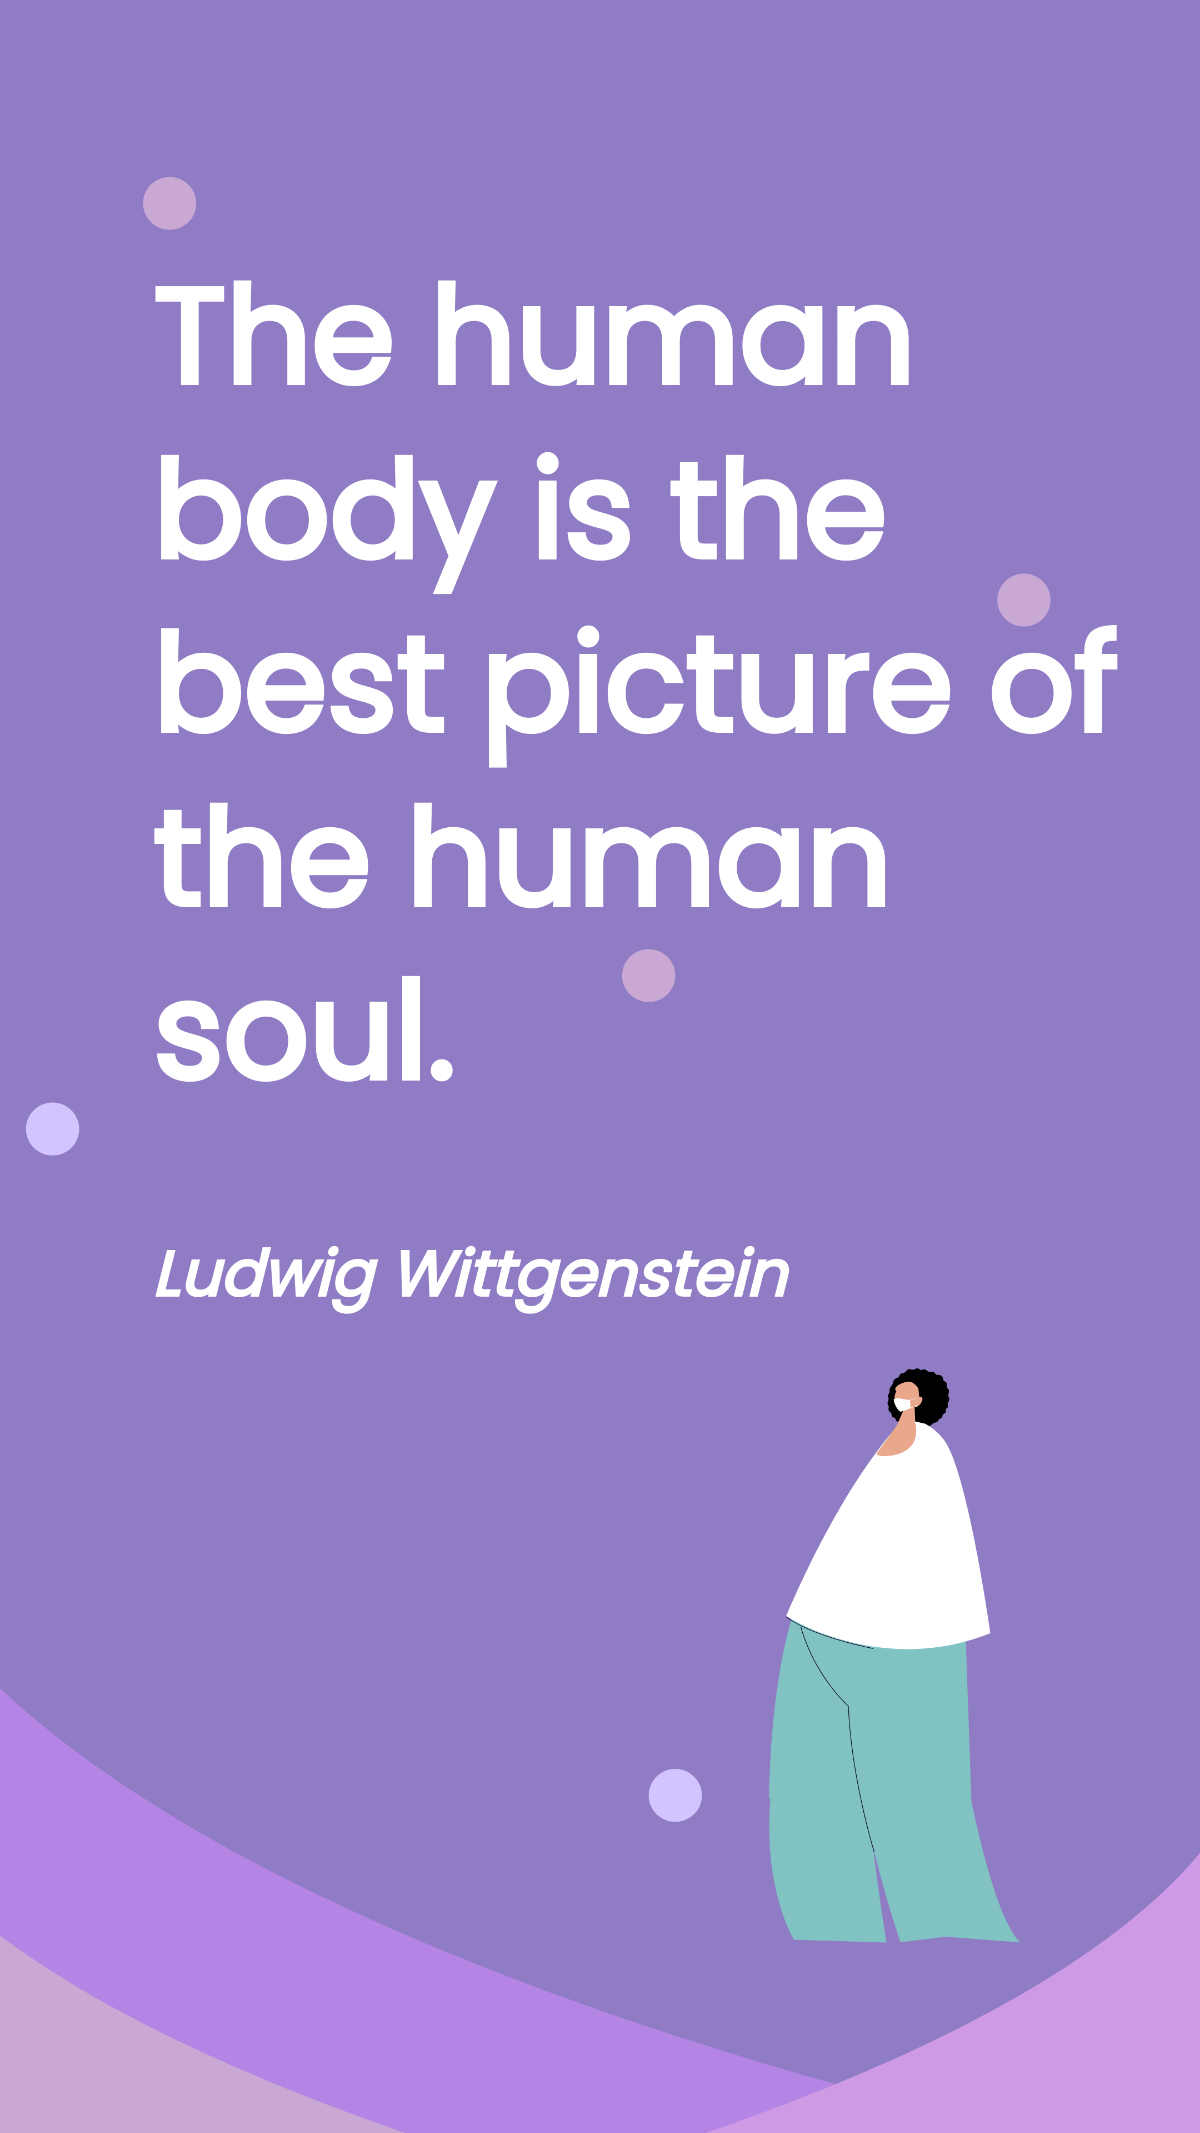 Free Ludwig Wittgenstein - The human body is the best picture of the human soul. Template